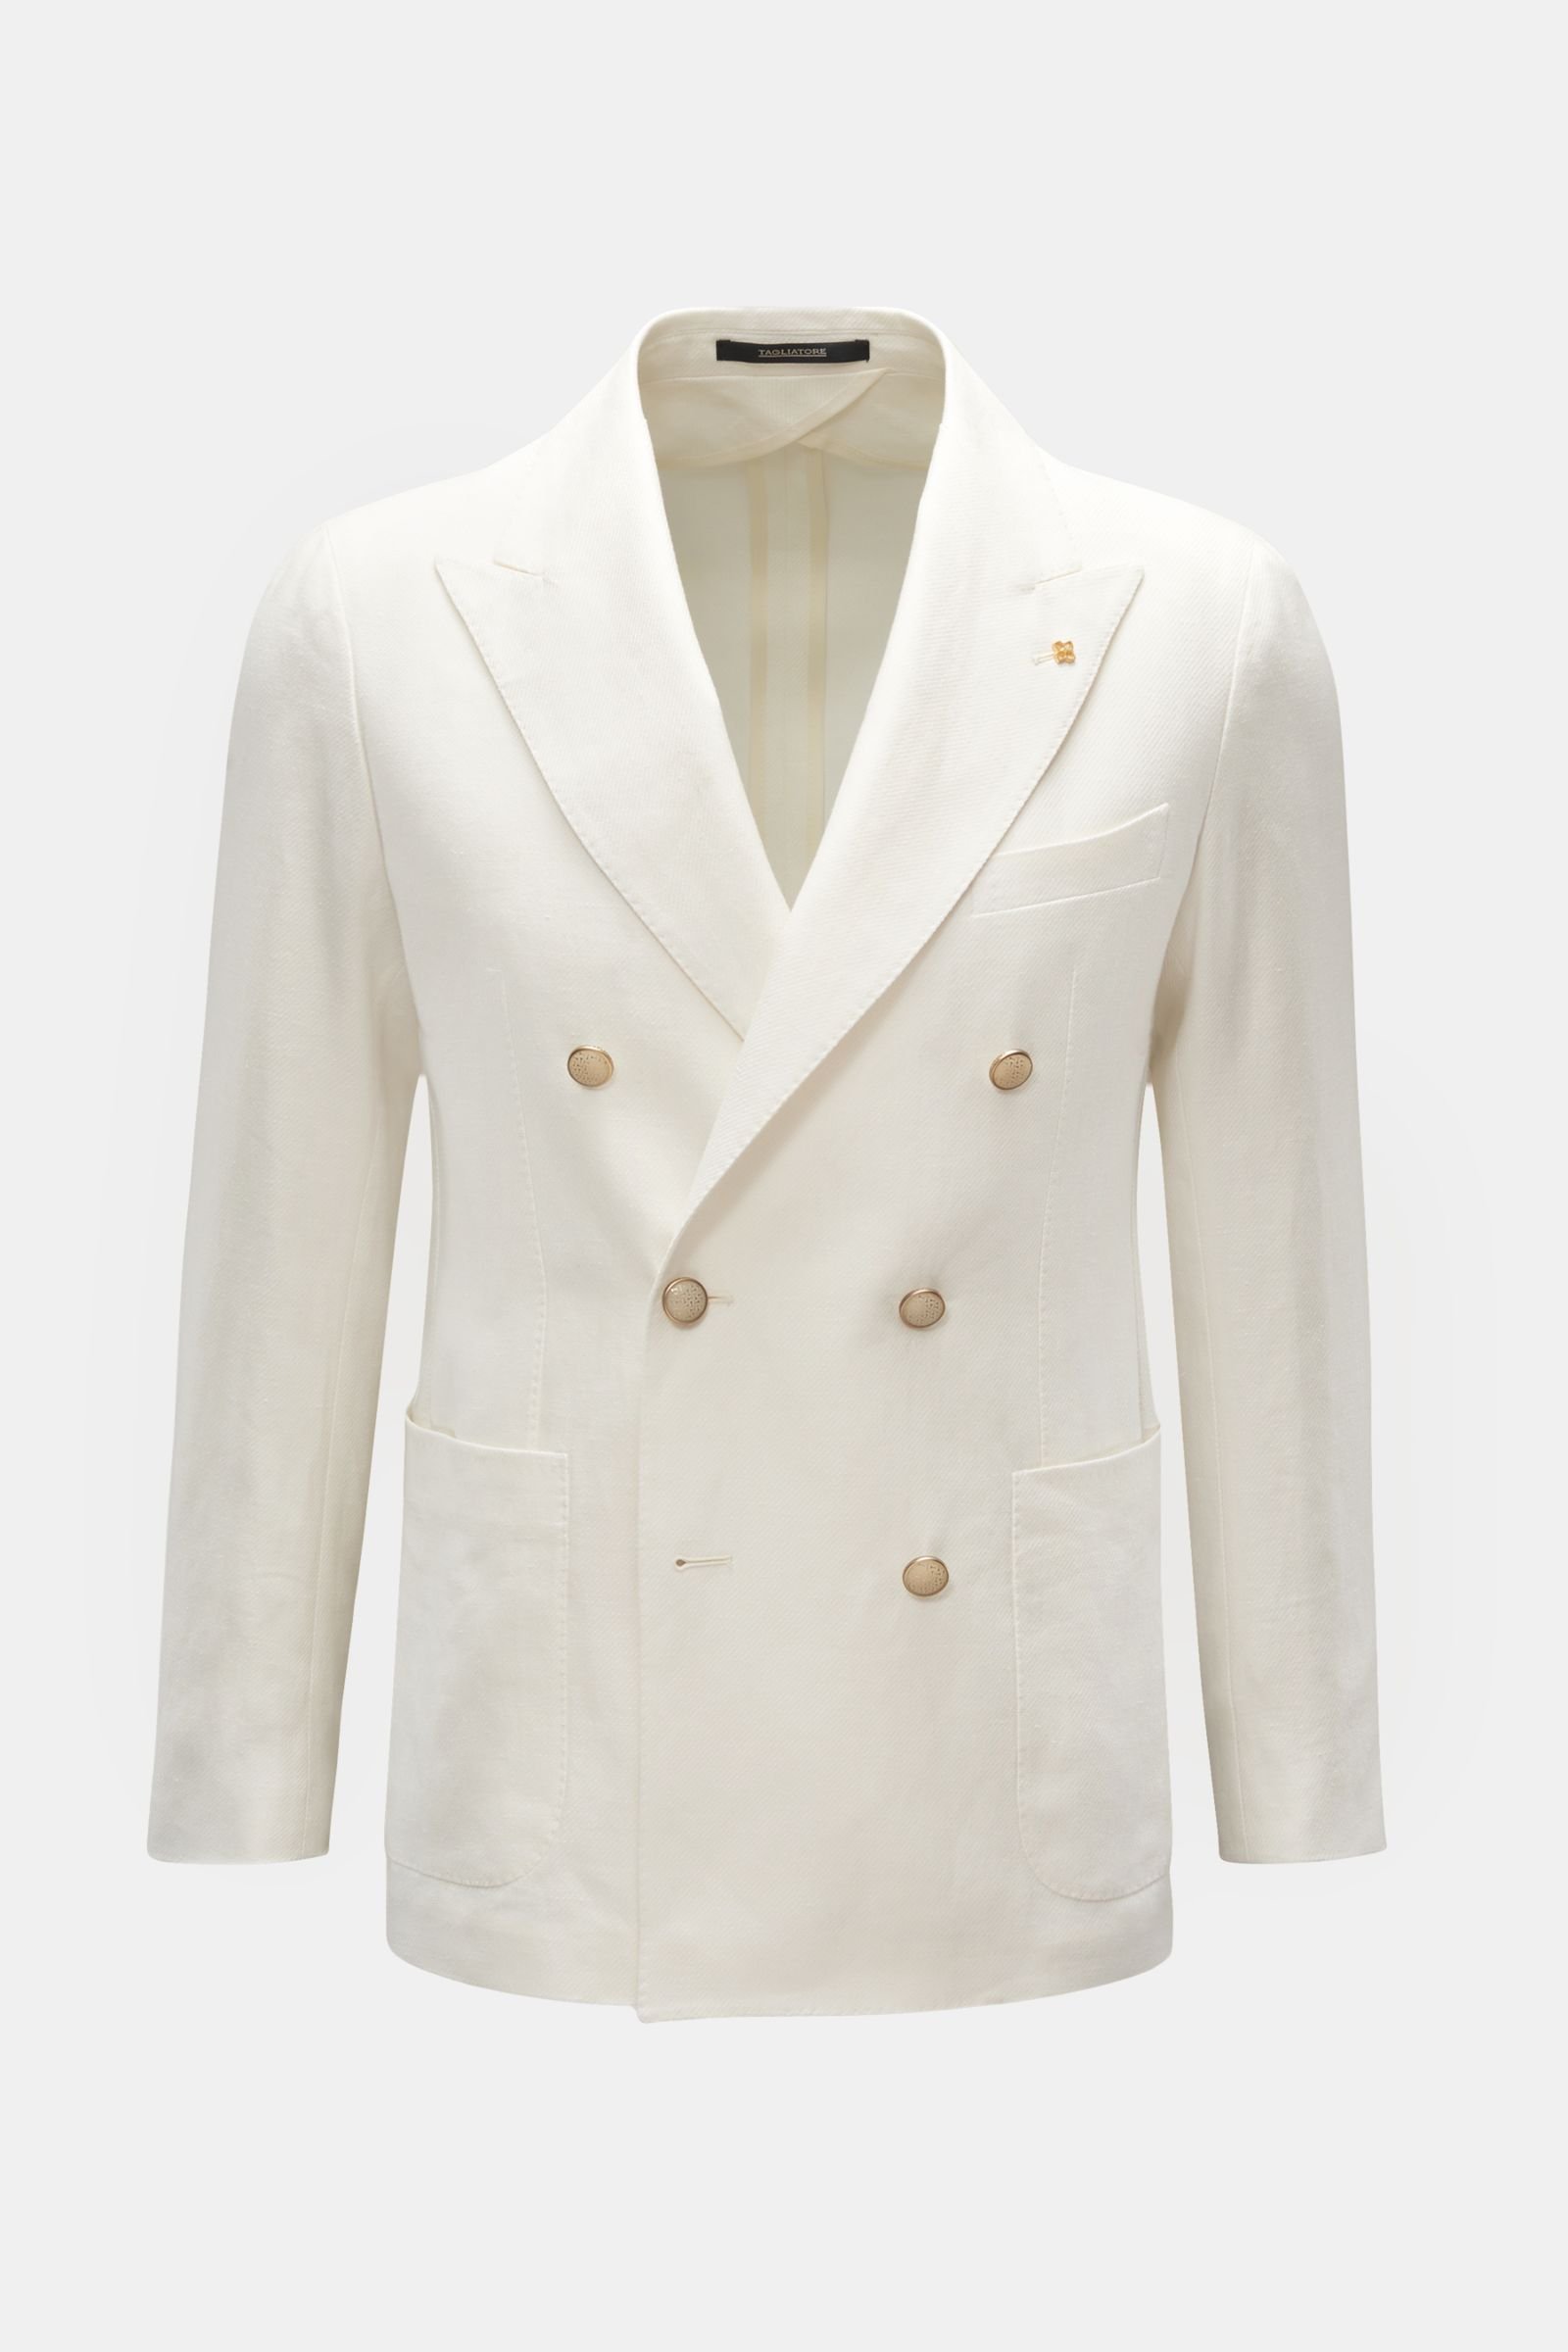 Smart-casual jacket off-white